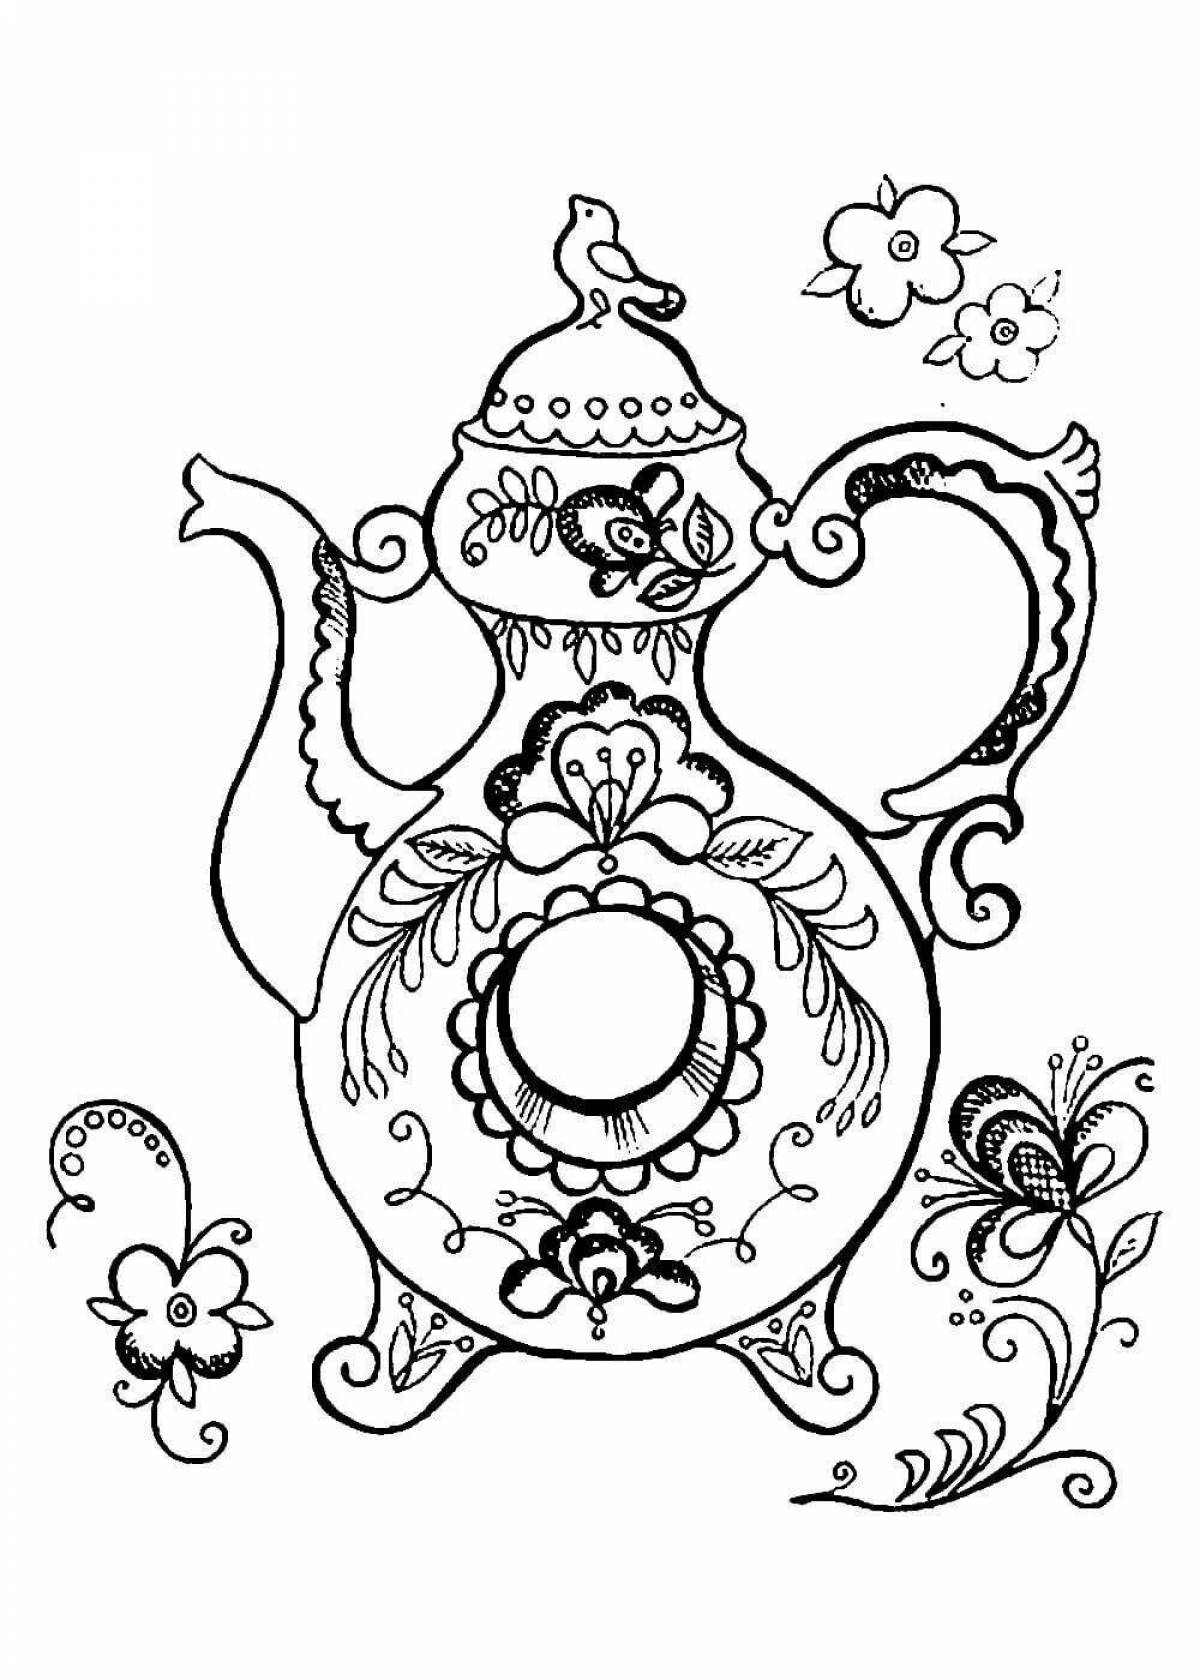 Gzhel playful teapot coloring page for kids